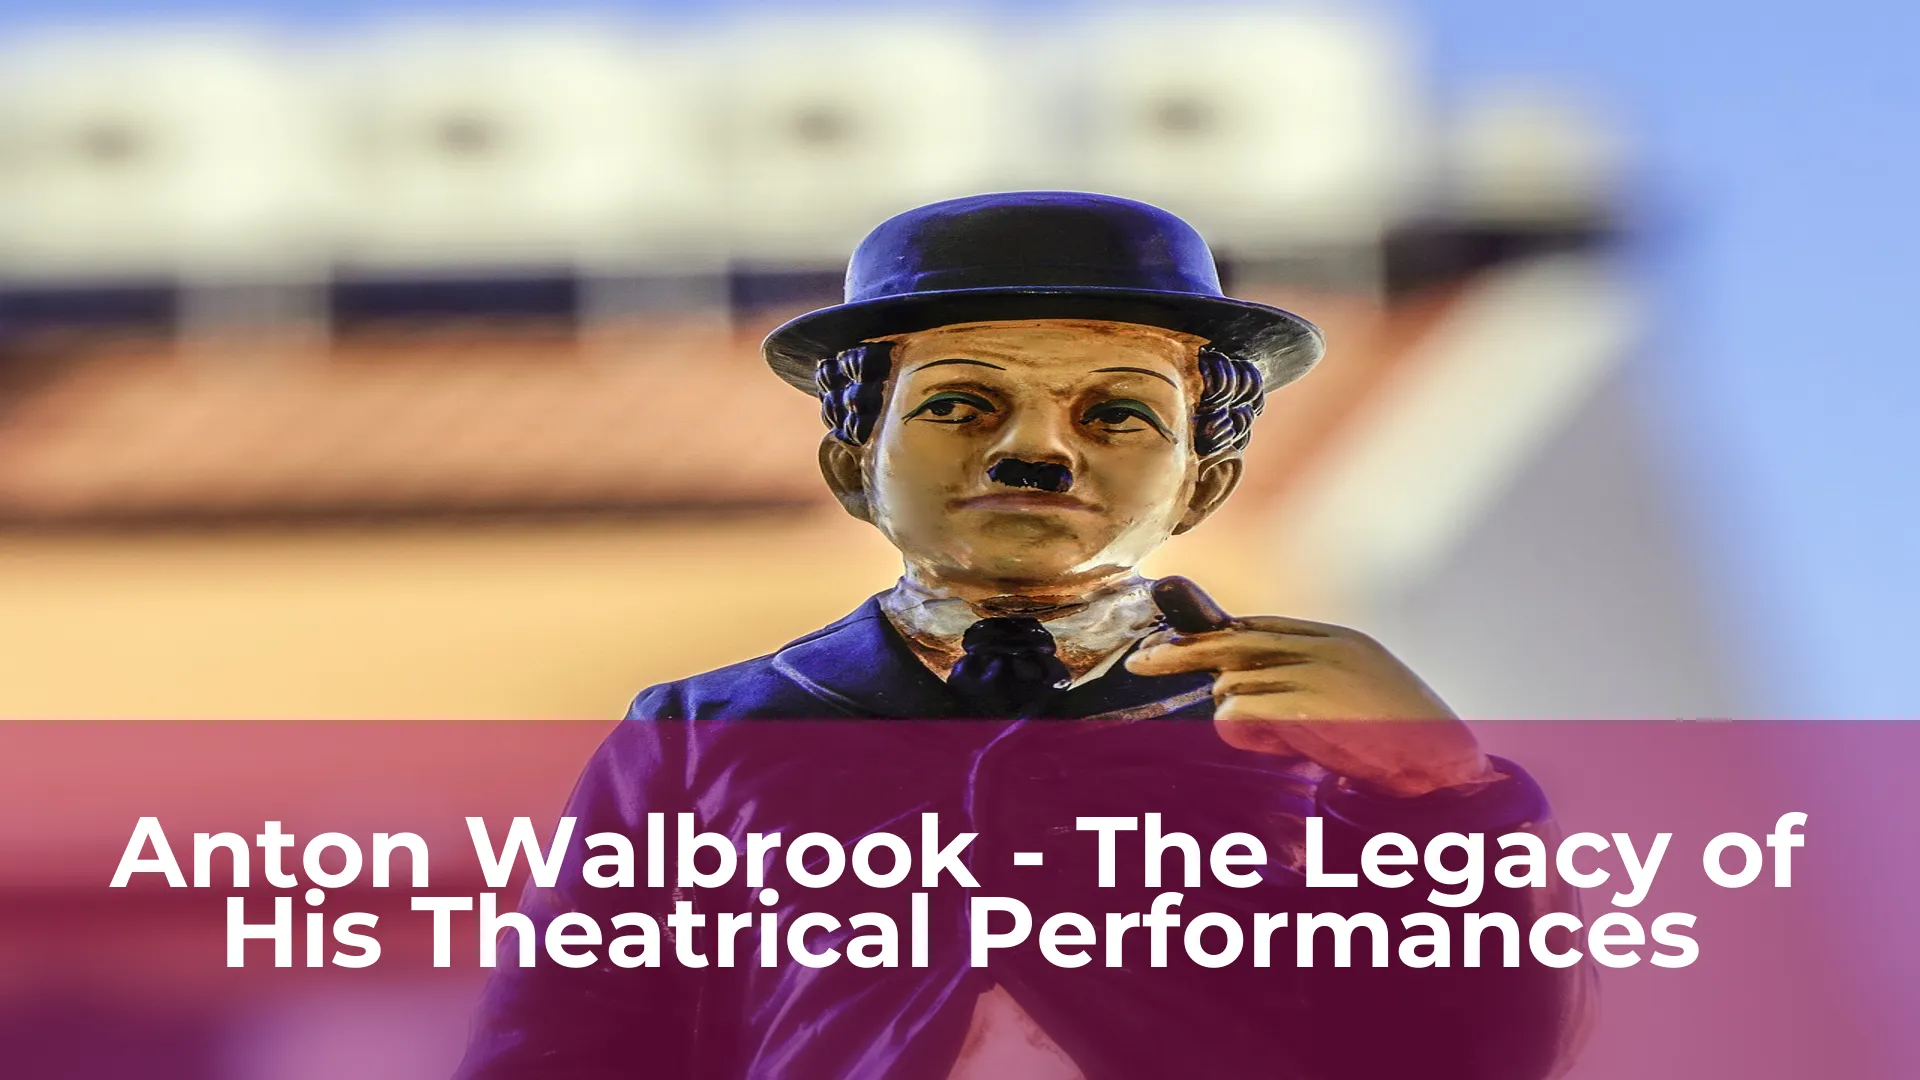 Anton walbrook the legacy of his theatrical performances